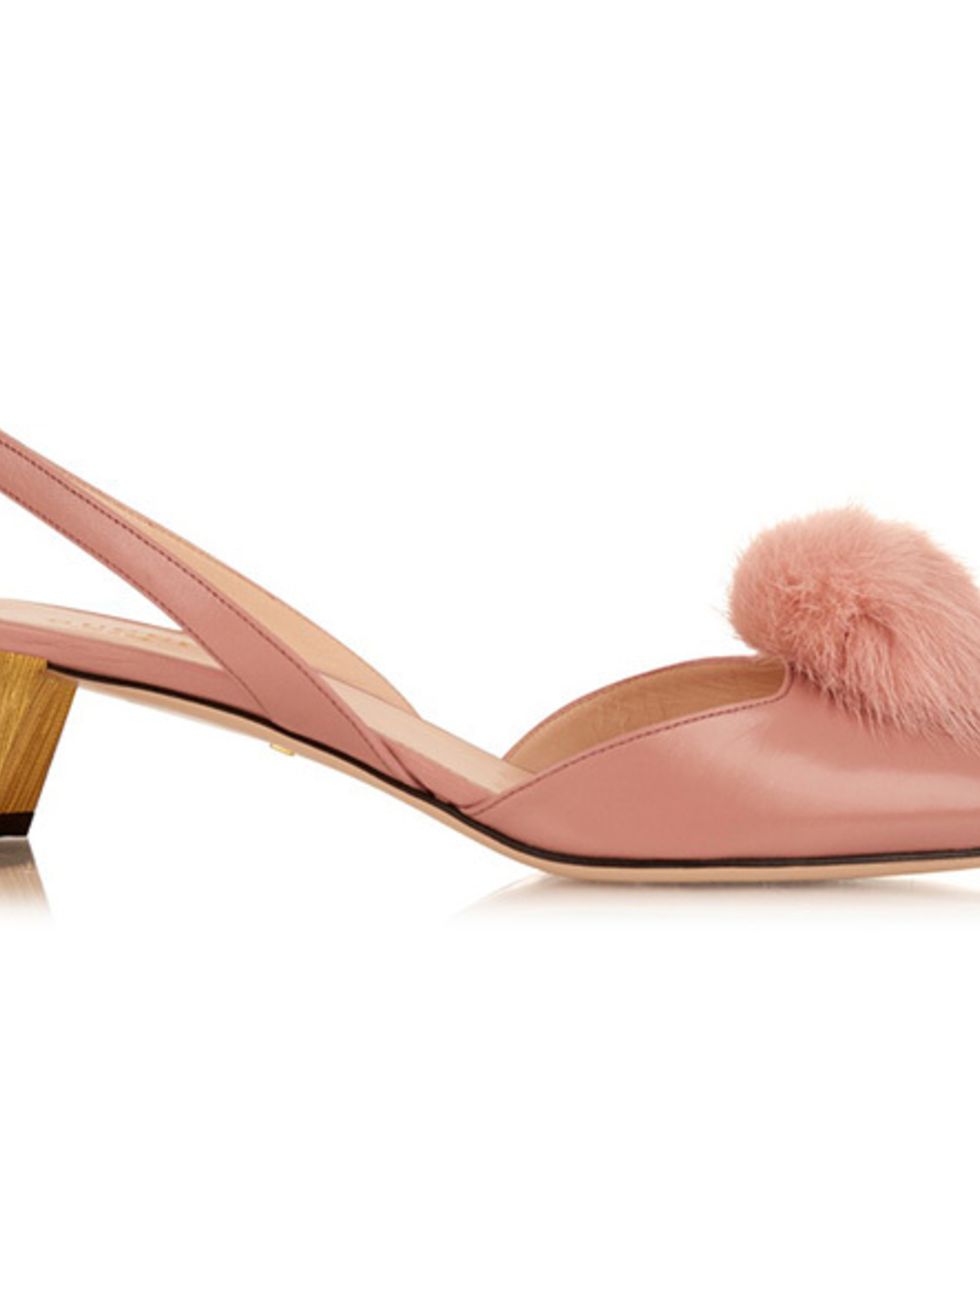 <p>Pom-pom leather pumps, £520, <a href="http://www.matchesfashion.com/products/Gucci-Mink-fur-pompom-leather-pumps--1034294" target="_blank">Gucci</a></p>